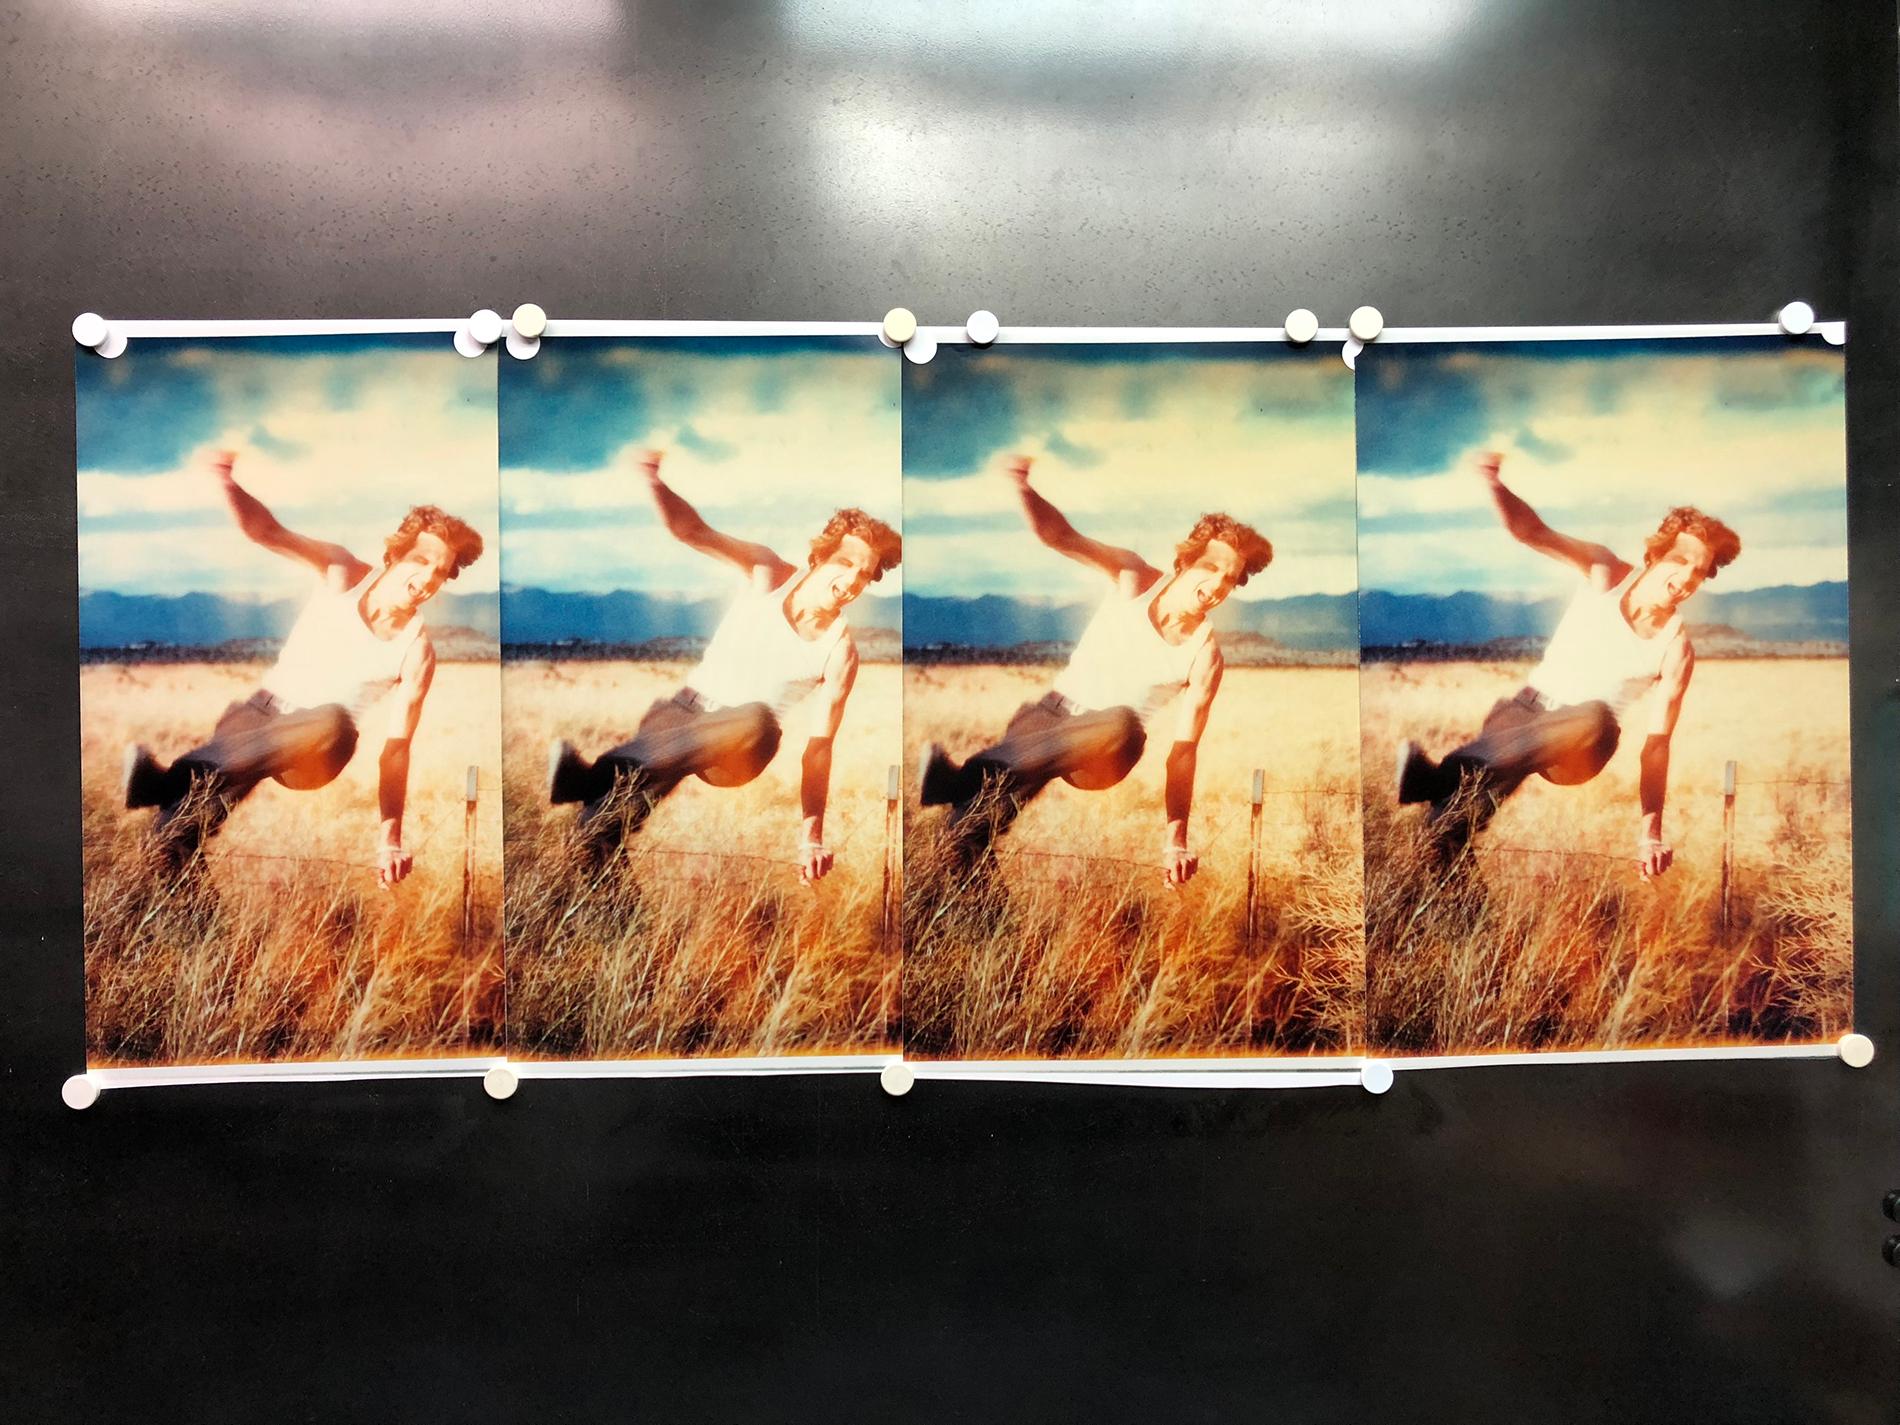 Field of Dreams (Sidewinder), 4 analog test strips combined to make a unique piece, 203x82cm.
Edition 1/1, signed. 
Analog C-Prints, hand-printed by the artist on Crystal Fuji Archive Paper, based on a Stefanie Schneider expired SX-70 Polaroid